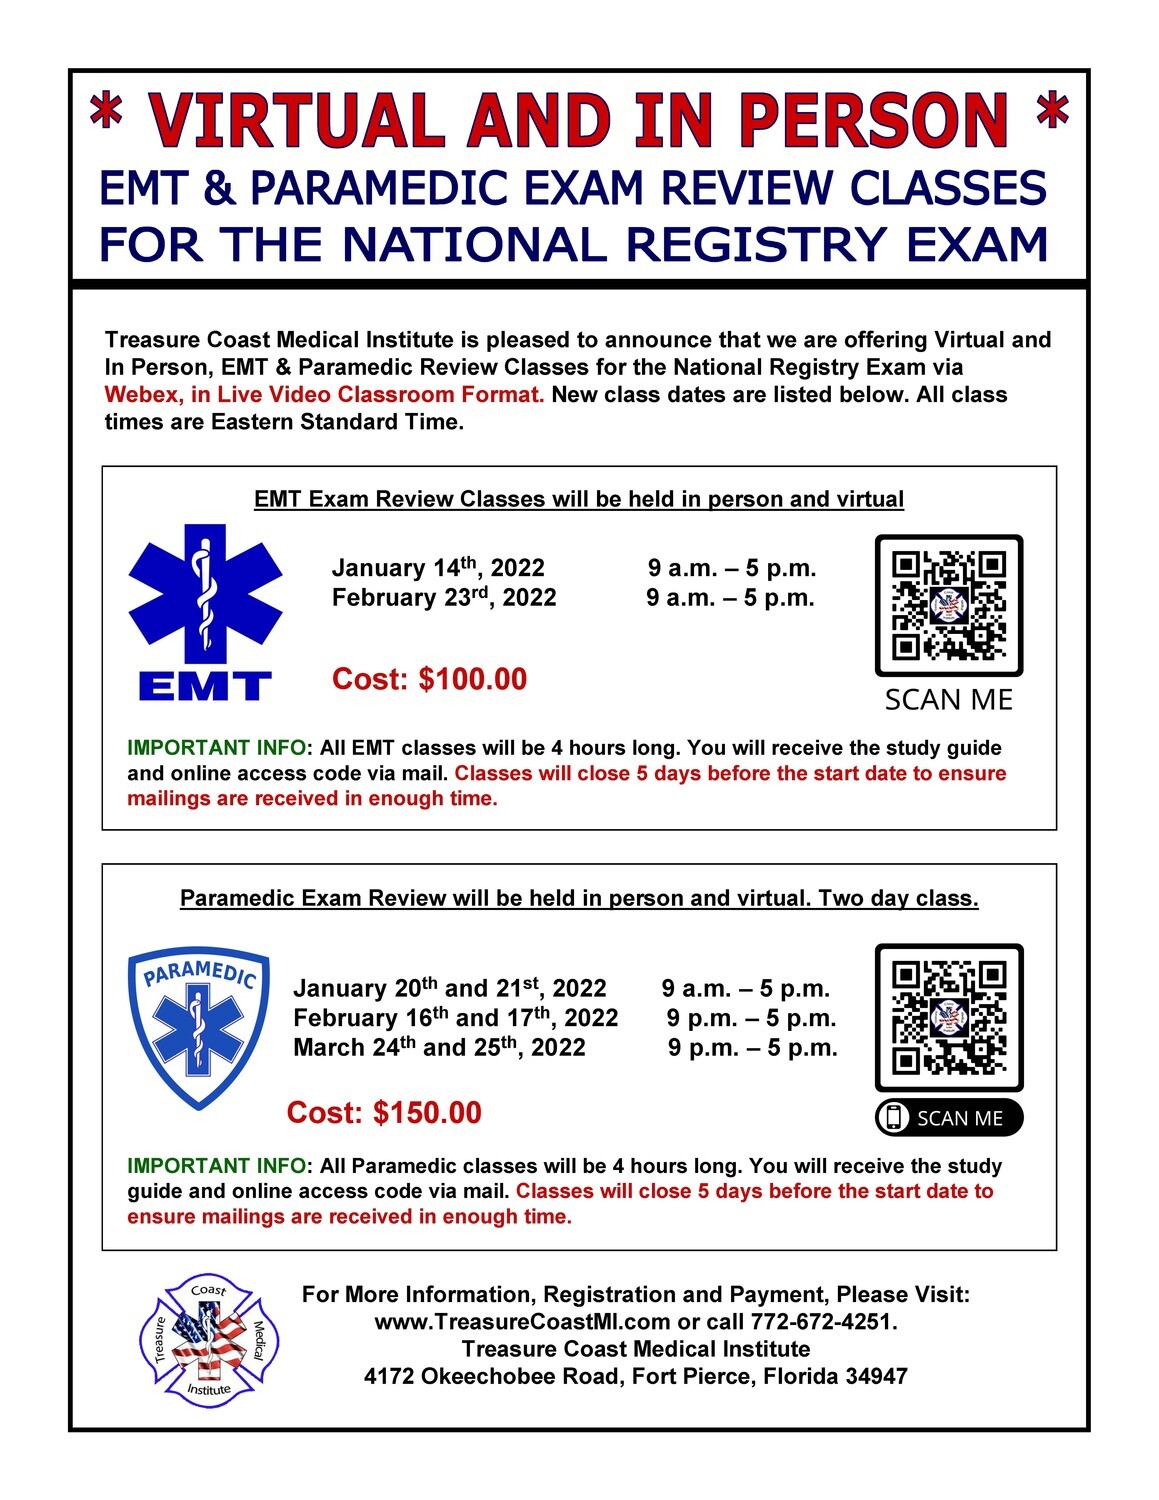 National Registry Paramedic February 10th and 11th Fort Pierce TCMI (IN PERSON)